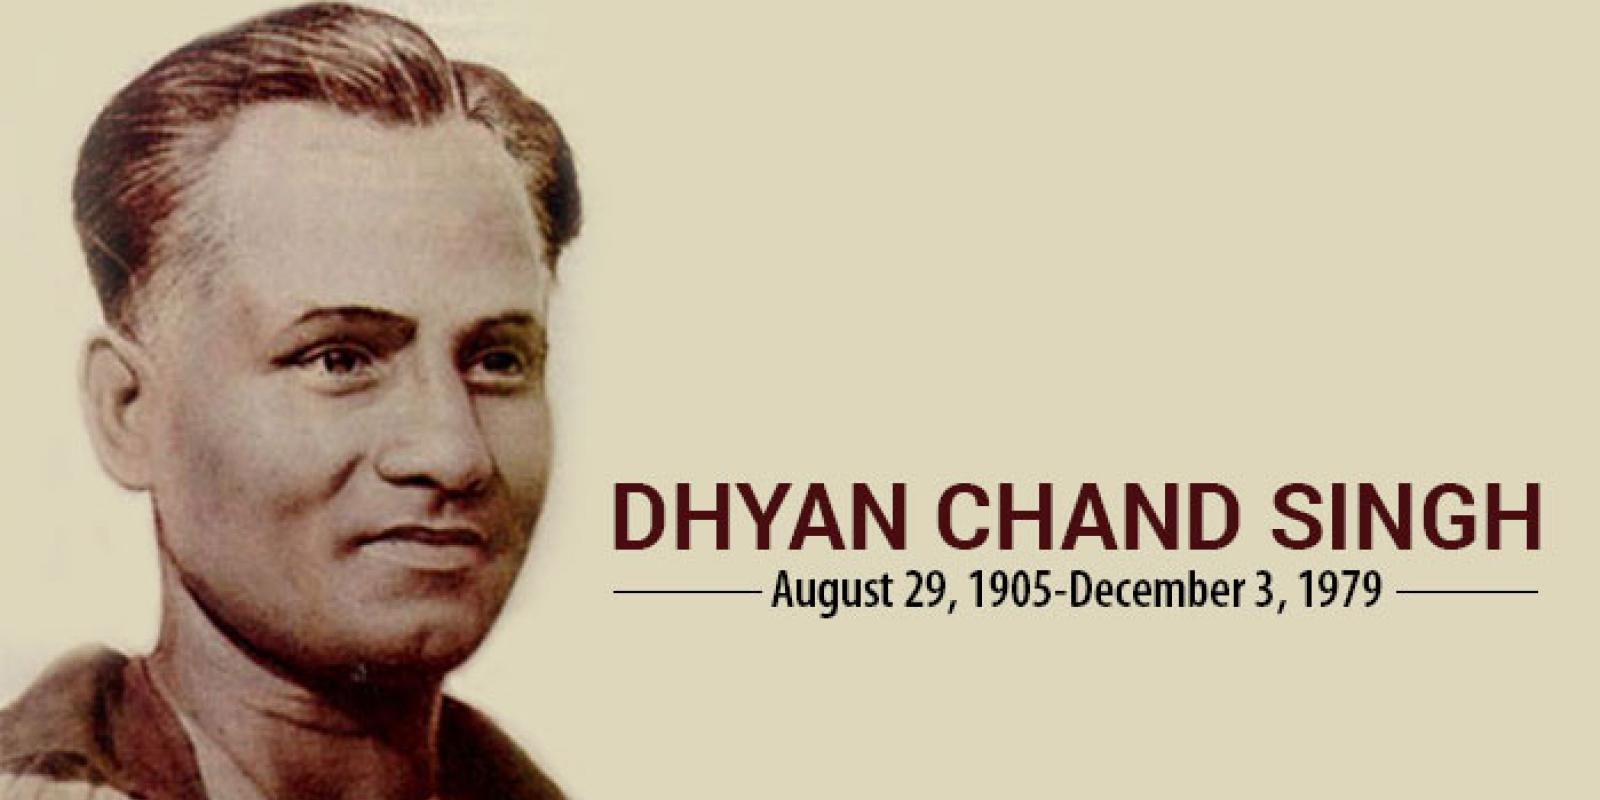 Major Dhyanchand